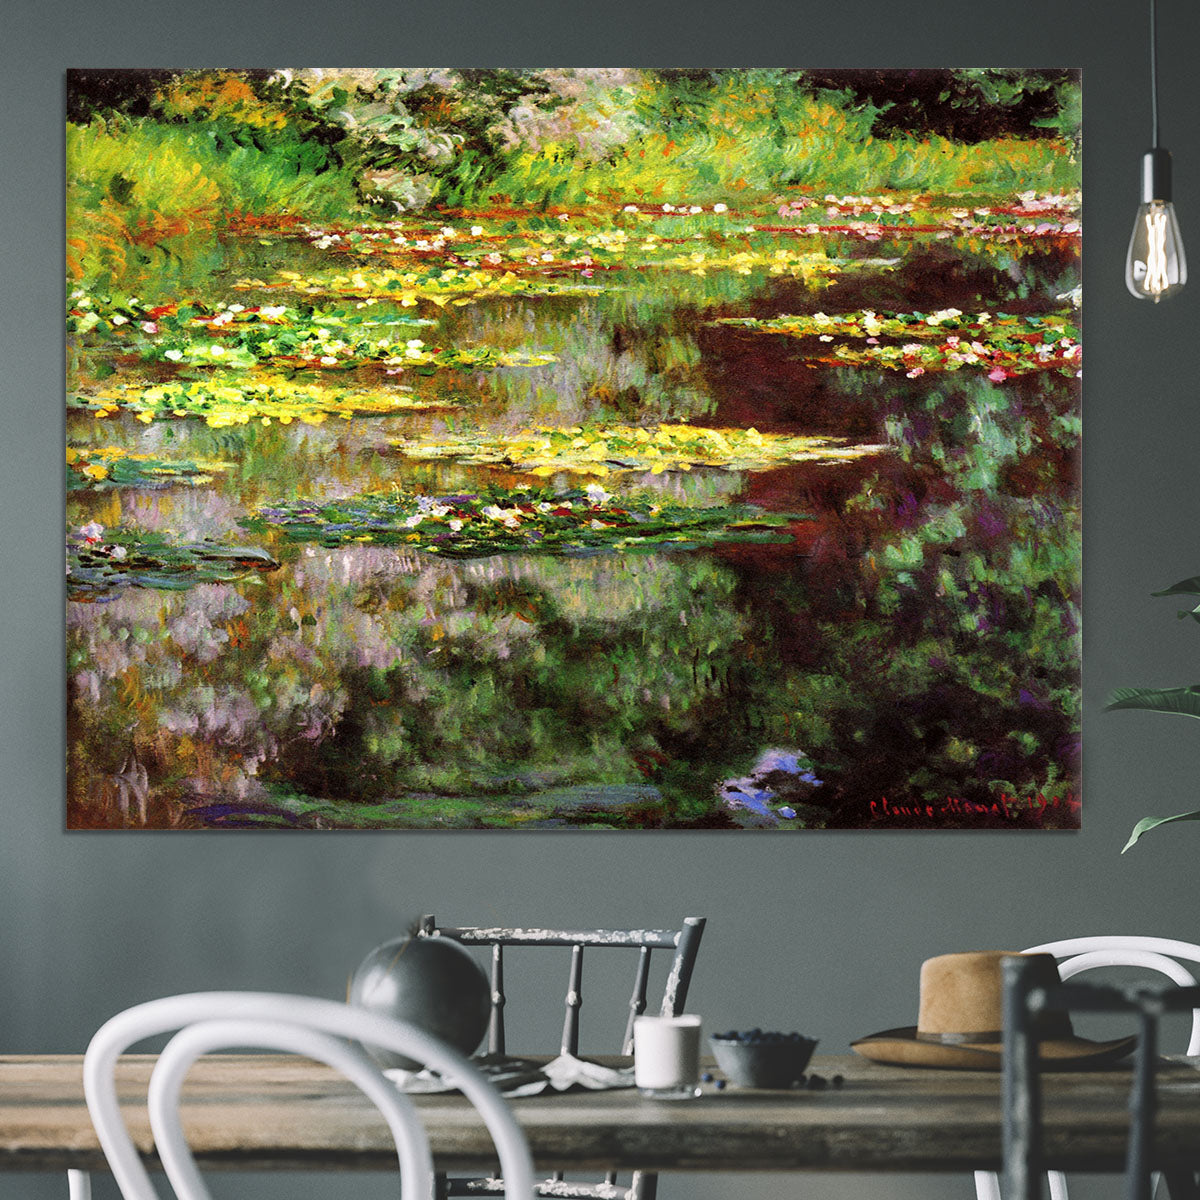 Sea rose pond by Monet Canvas Print or Poster - Canvas Art Rocks - 3